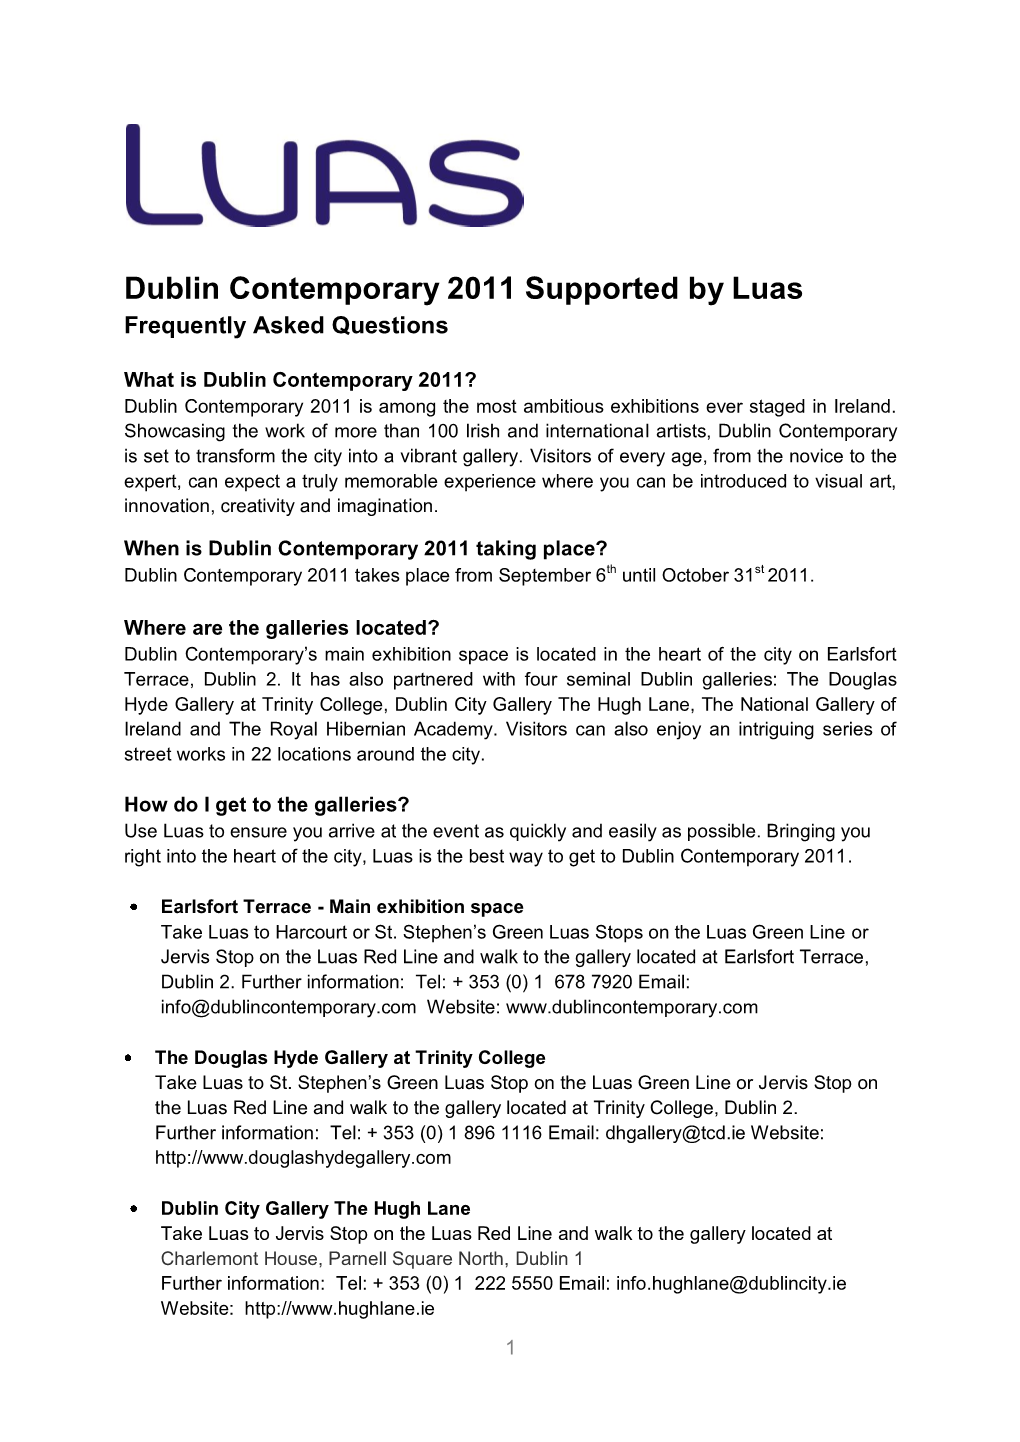 Dublin Contemporary 2011 Supported by Luas Frequently Asked Questions